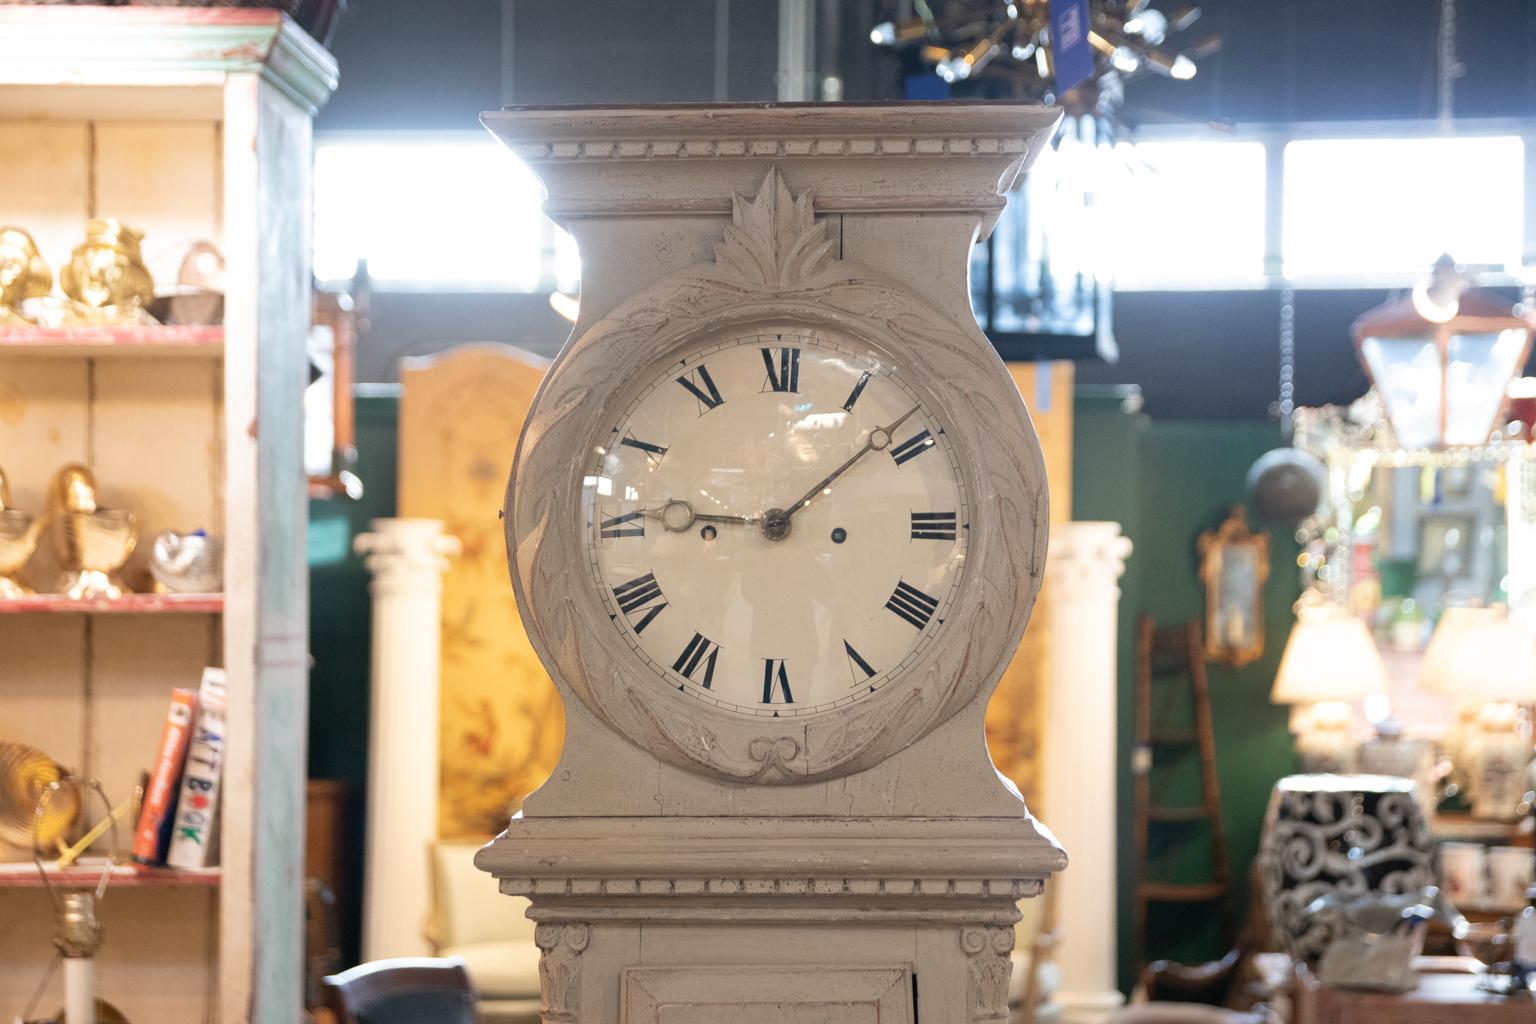 Swedish Gustavian style painted tall case clock in working condition, circa 19th century. The case is detailed with dentil trim, carved folliage framing the face, and composite columns on the body. The piece chimes every hour. Please note of wear